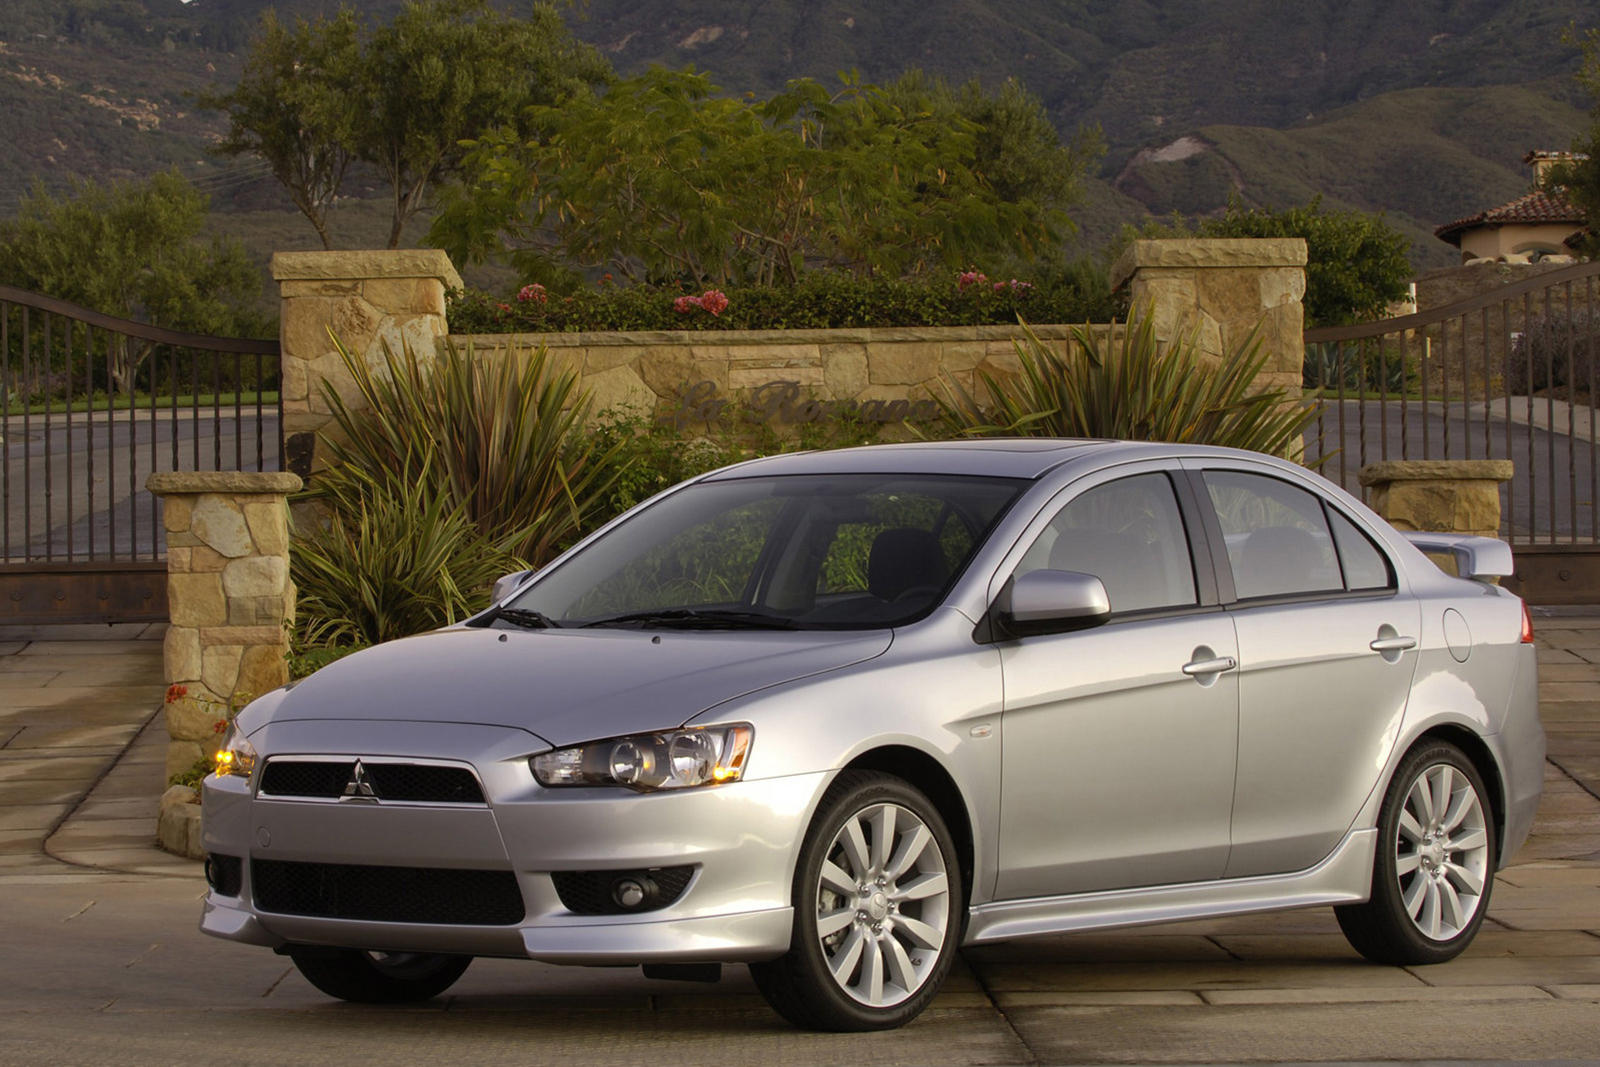 2012 Mitsubishi Lancer Sedan: Review, Trims, Specs, Price, New Interior  Features, Exterior Design, and Specifications | CarBuzz